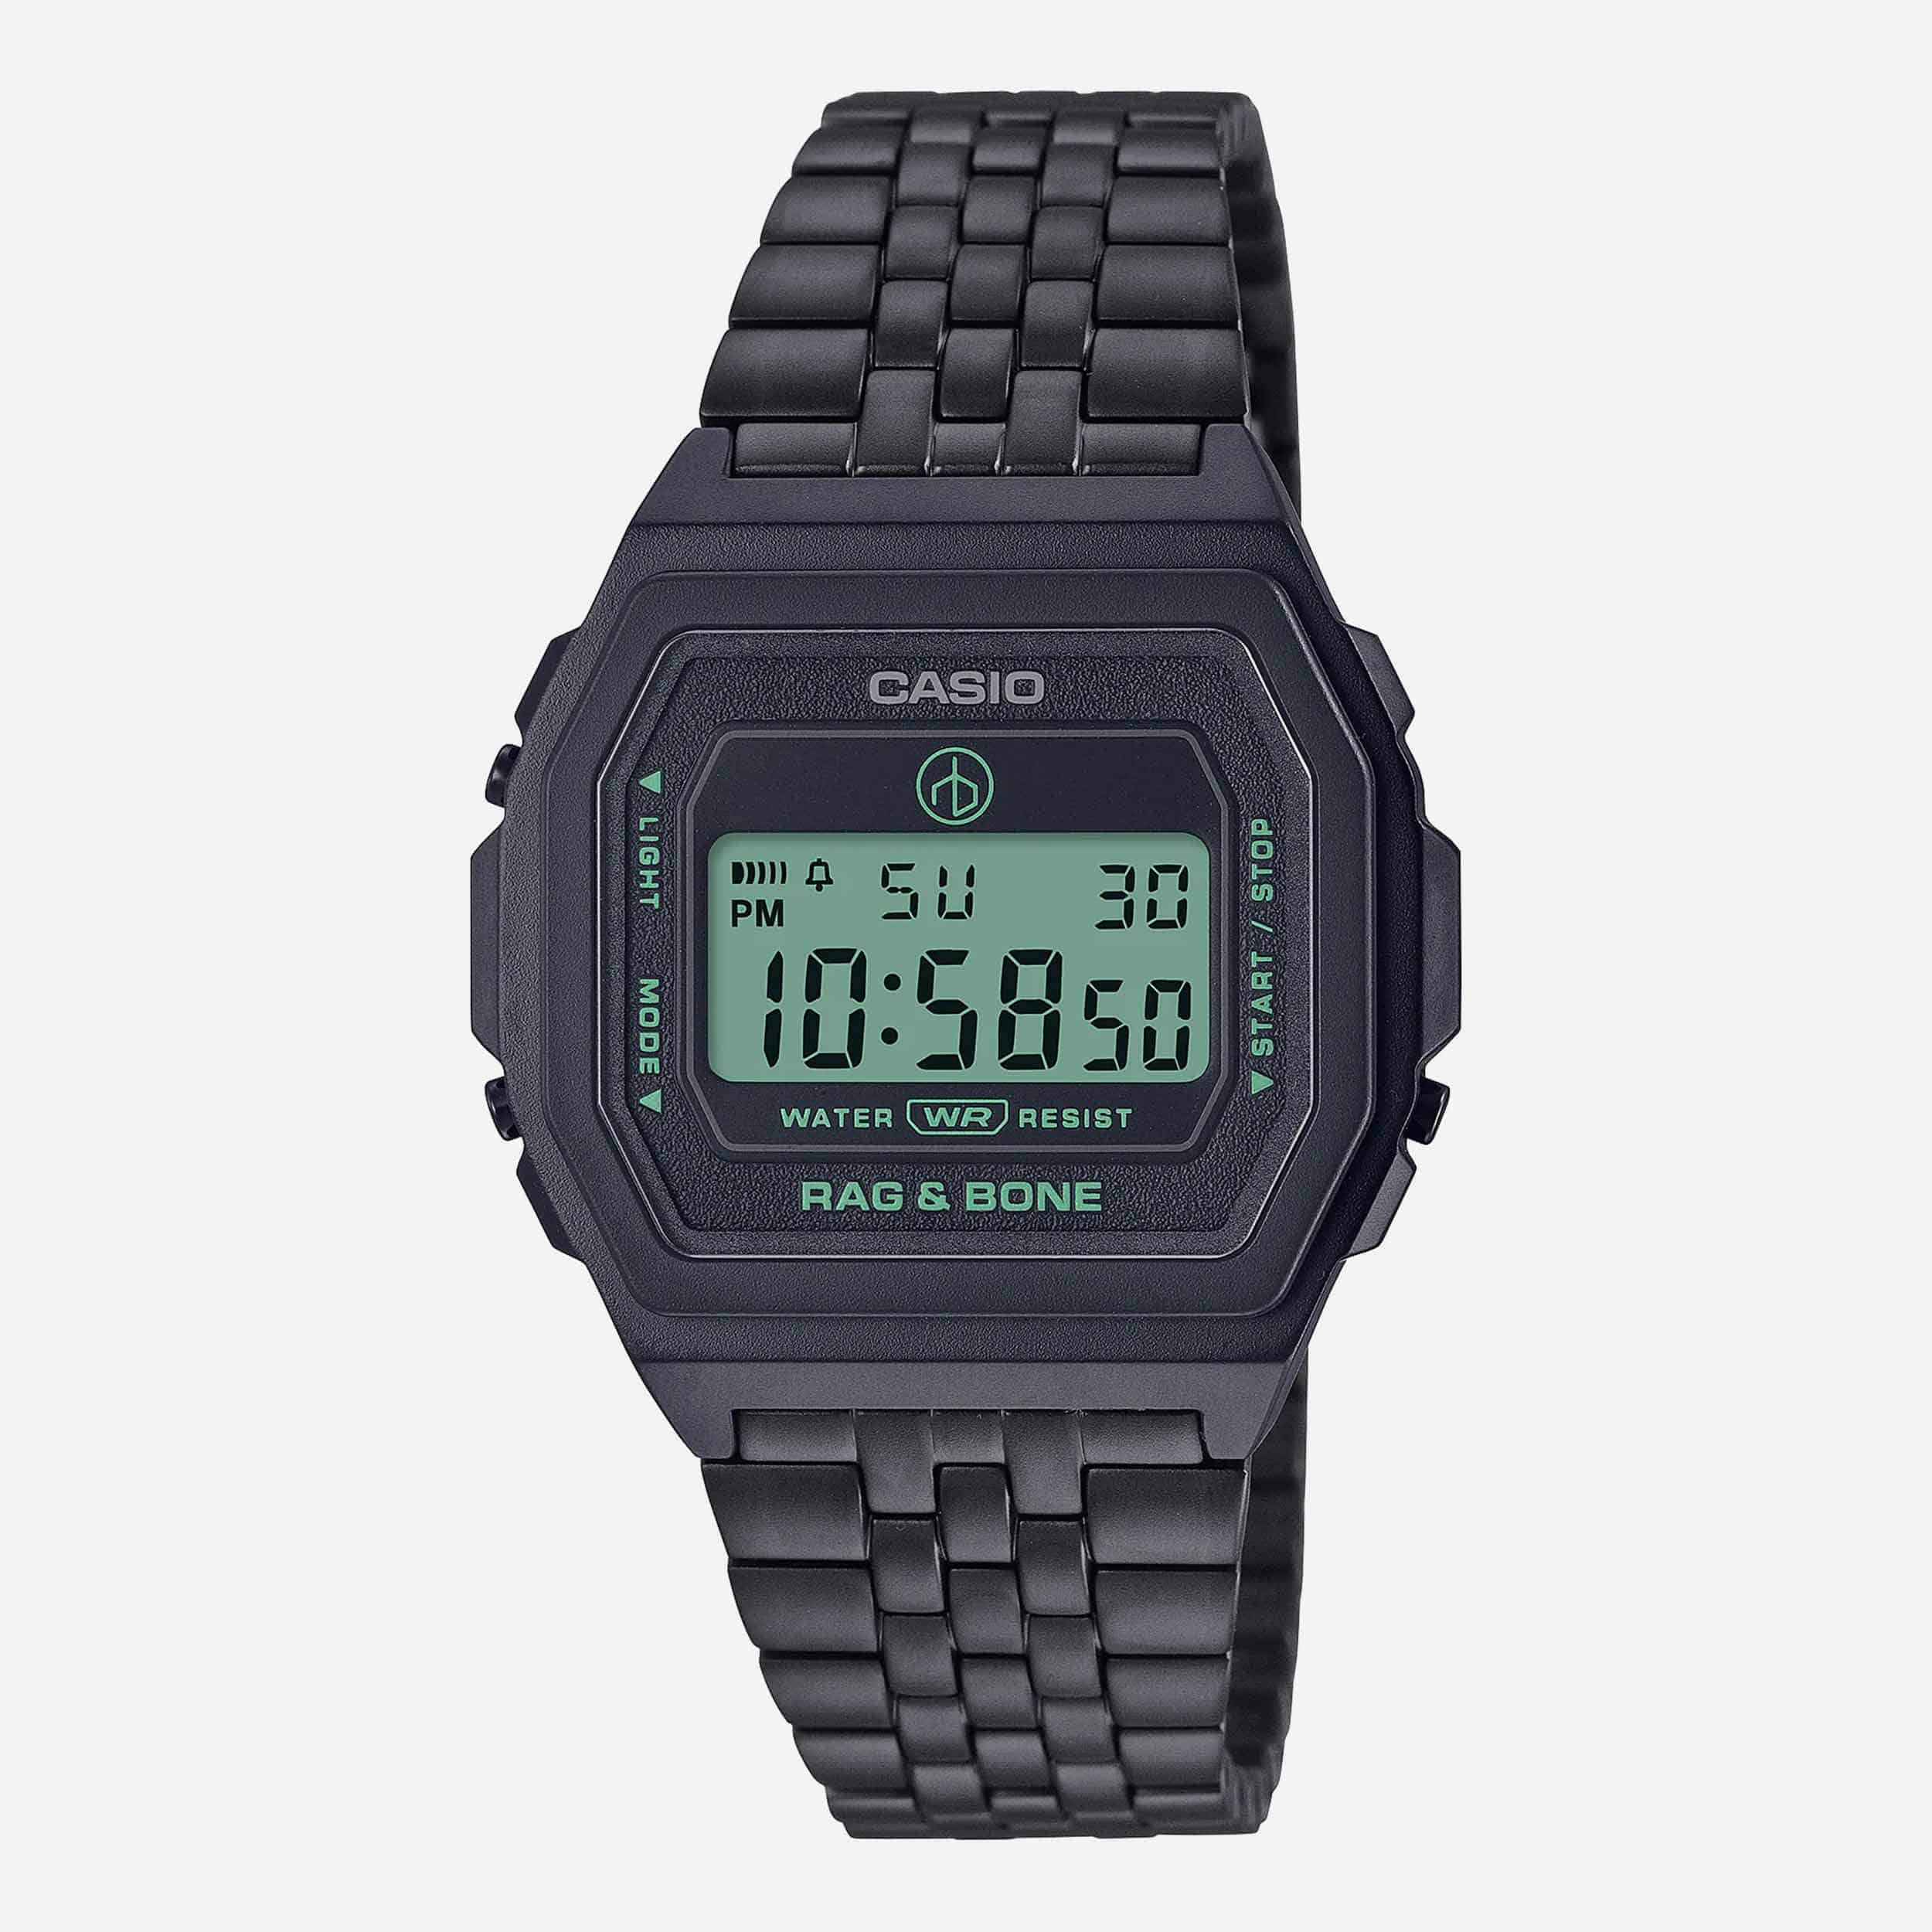 Casio Teams Up With Rag & Bone to Celebrate the Apparel Brand's 20th ...